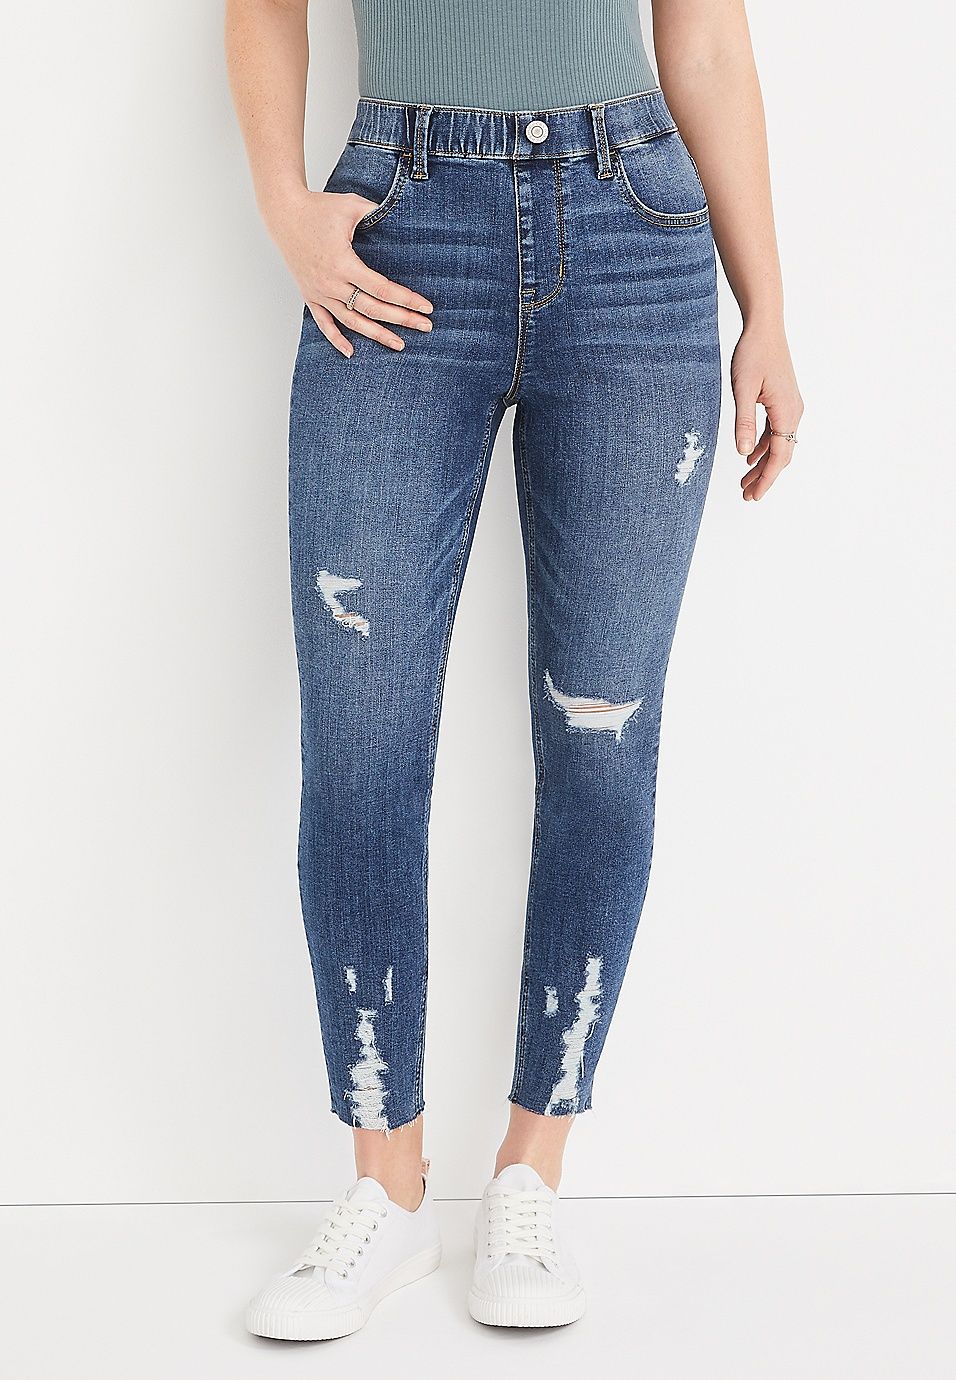 m jeans by maurices™ Cool Comfort Pull On Super High Rise Ripped Ankle Jegging | Maurices